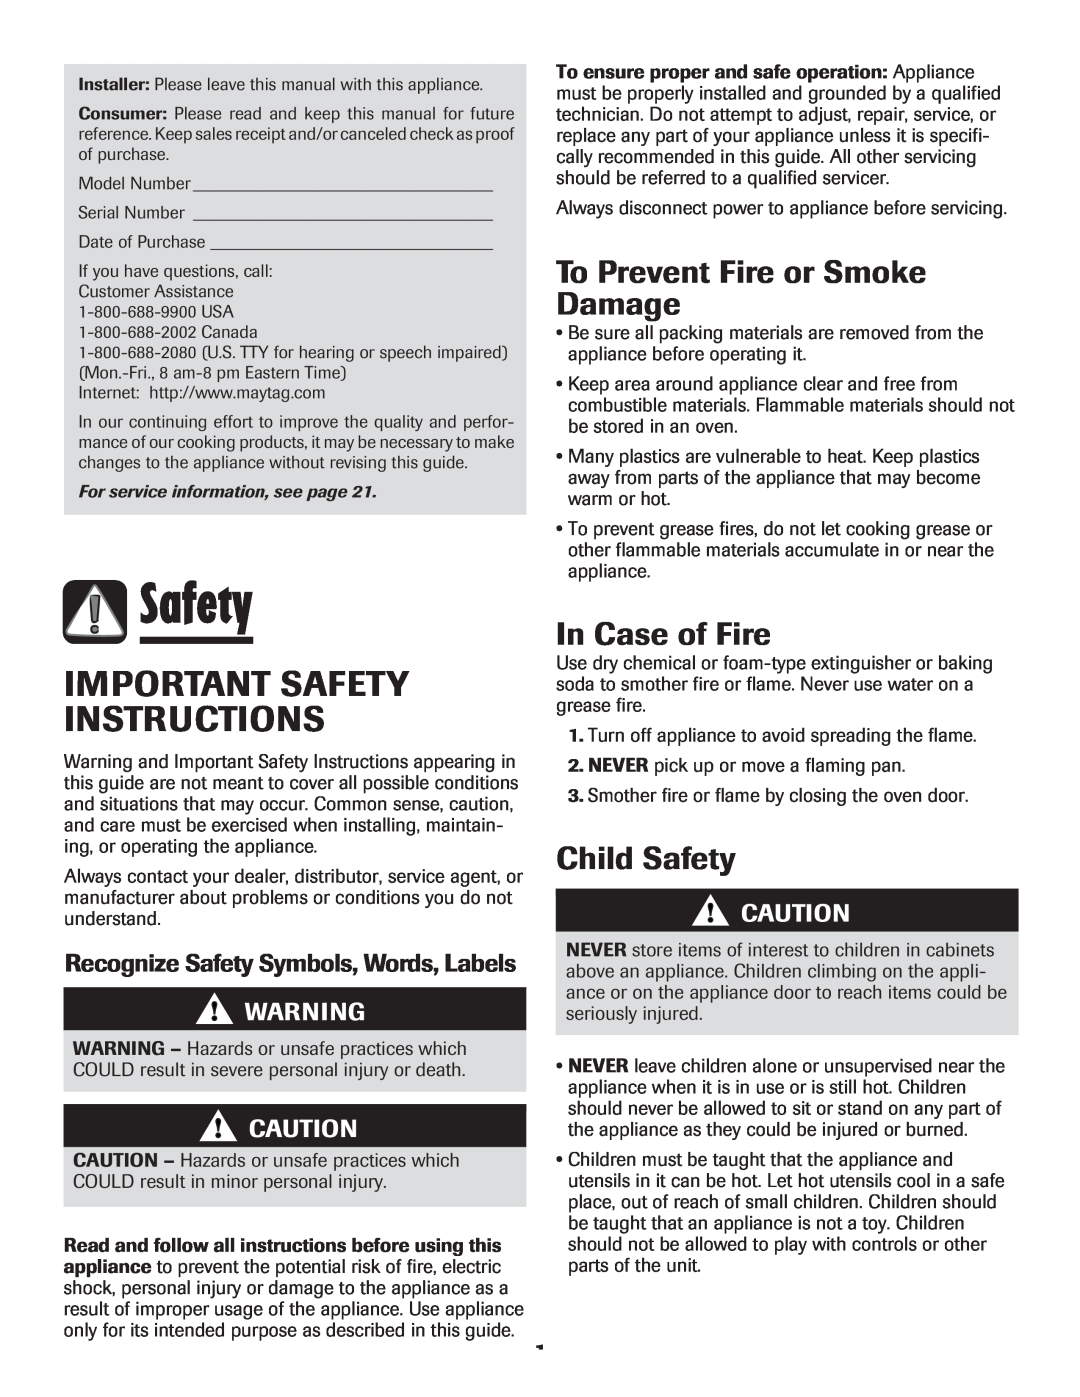 Maytag MEW6630DDW To Prevent Fire or Smoke Damage, In Case of Fire, Child Safety, Important Safety Instructions 